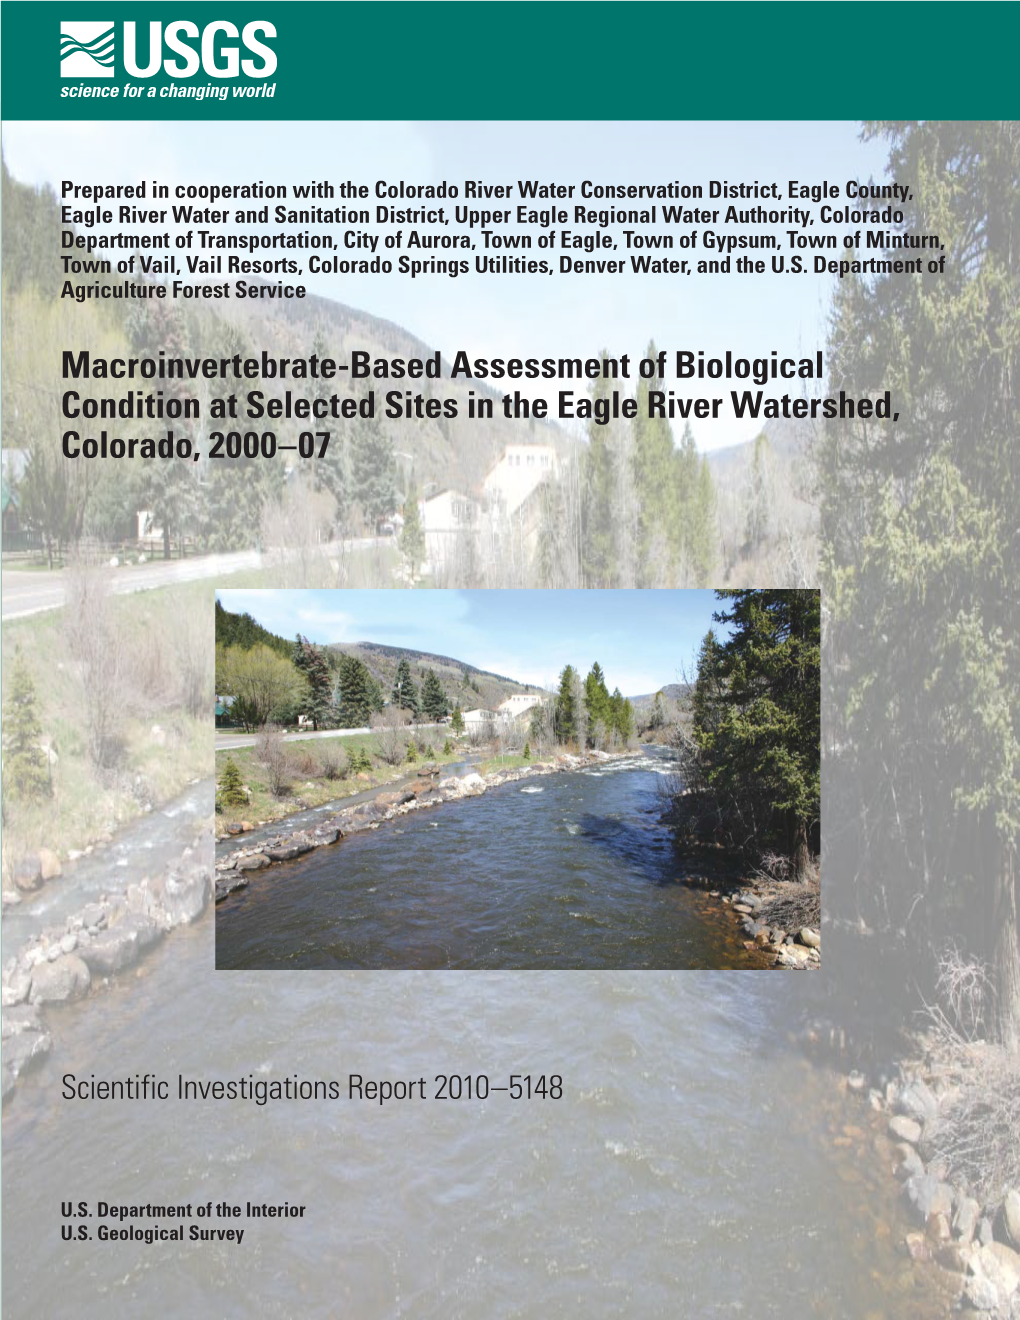 Macroinvertebrate-Based Assessment of Biological Condition at Selected Sites in the Eagle River Watershed, Colorado, 2000–07